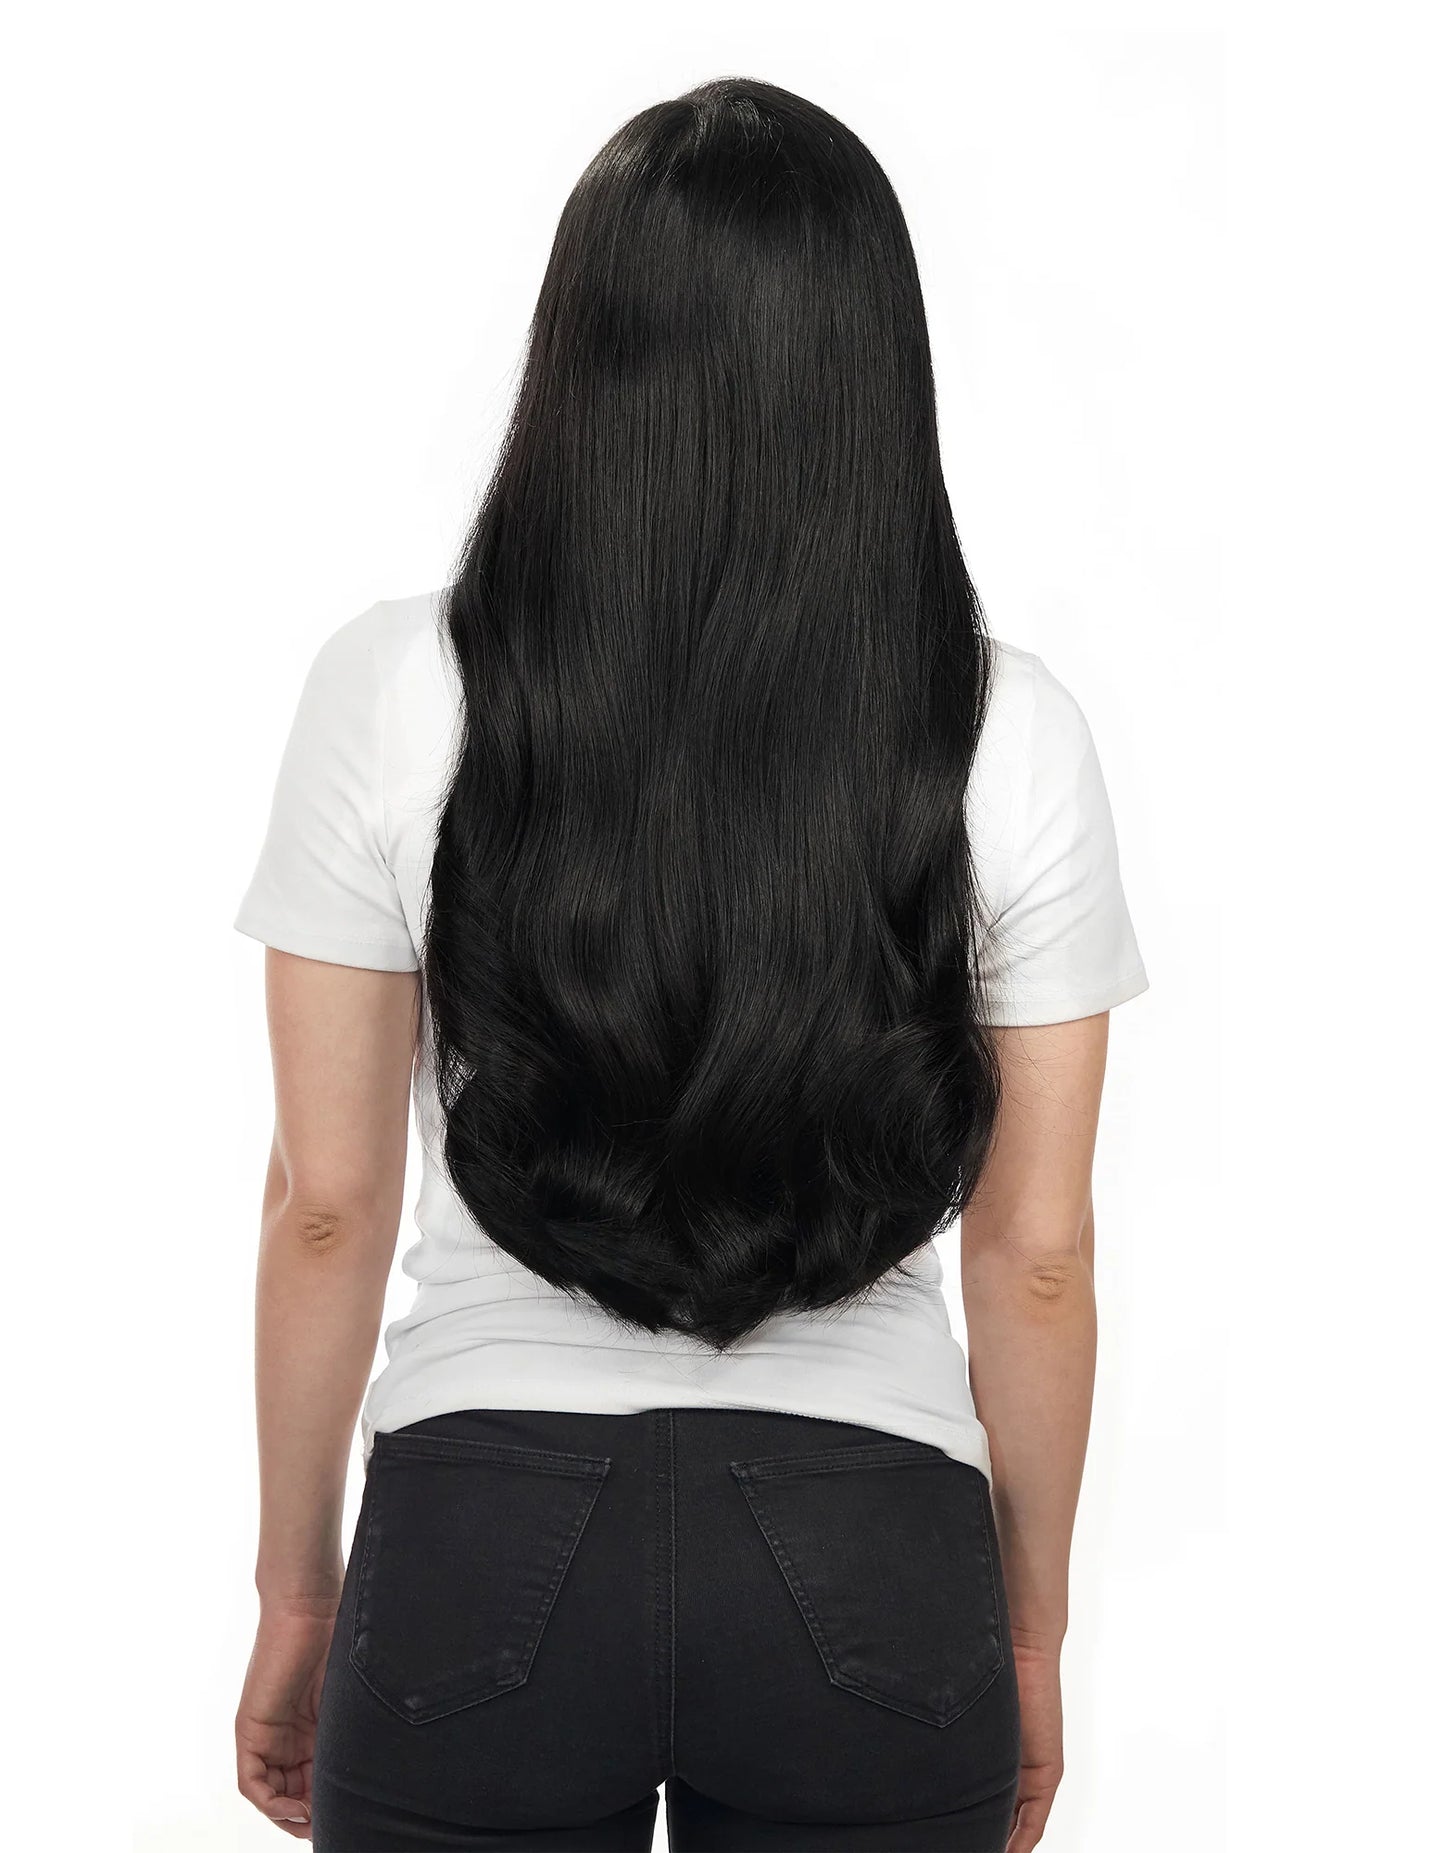 Lush Locks  Remy Clip in Human Hair Extensions (Natural Black)